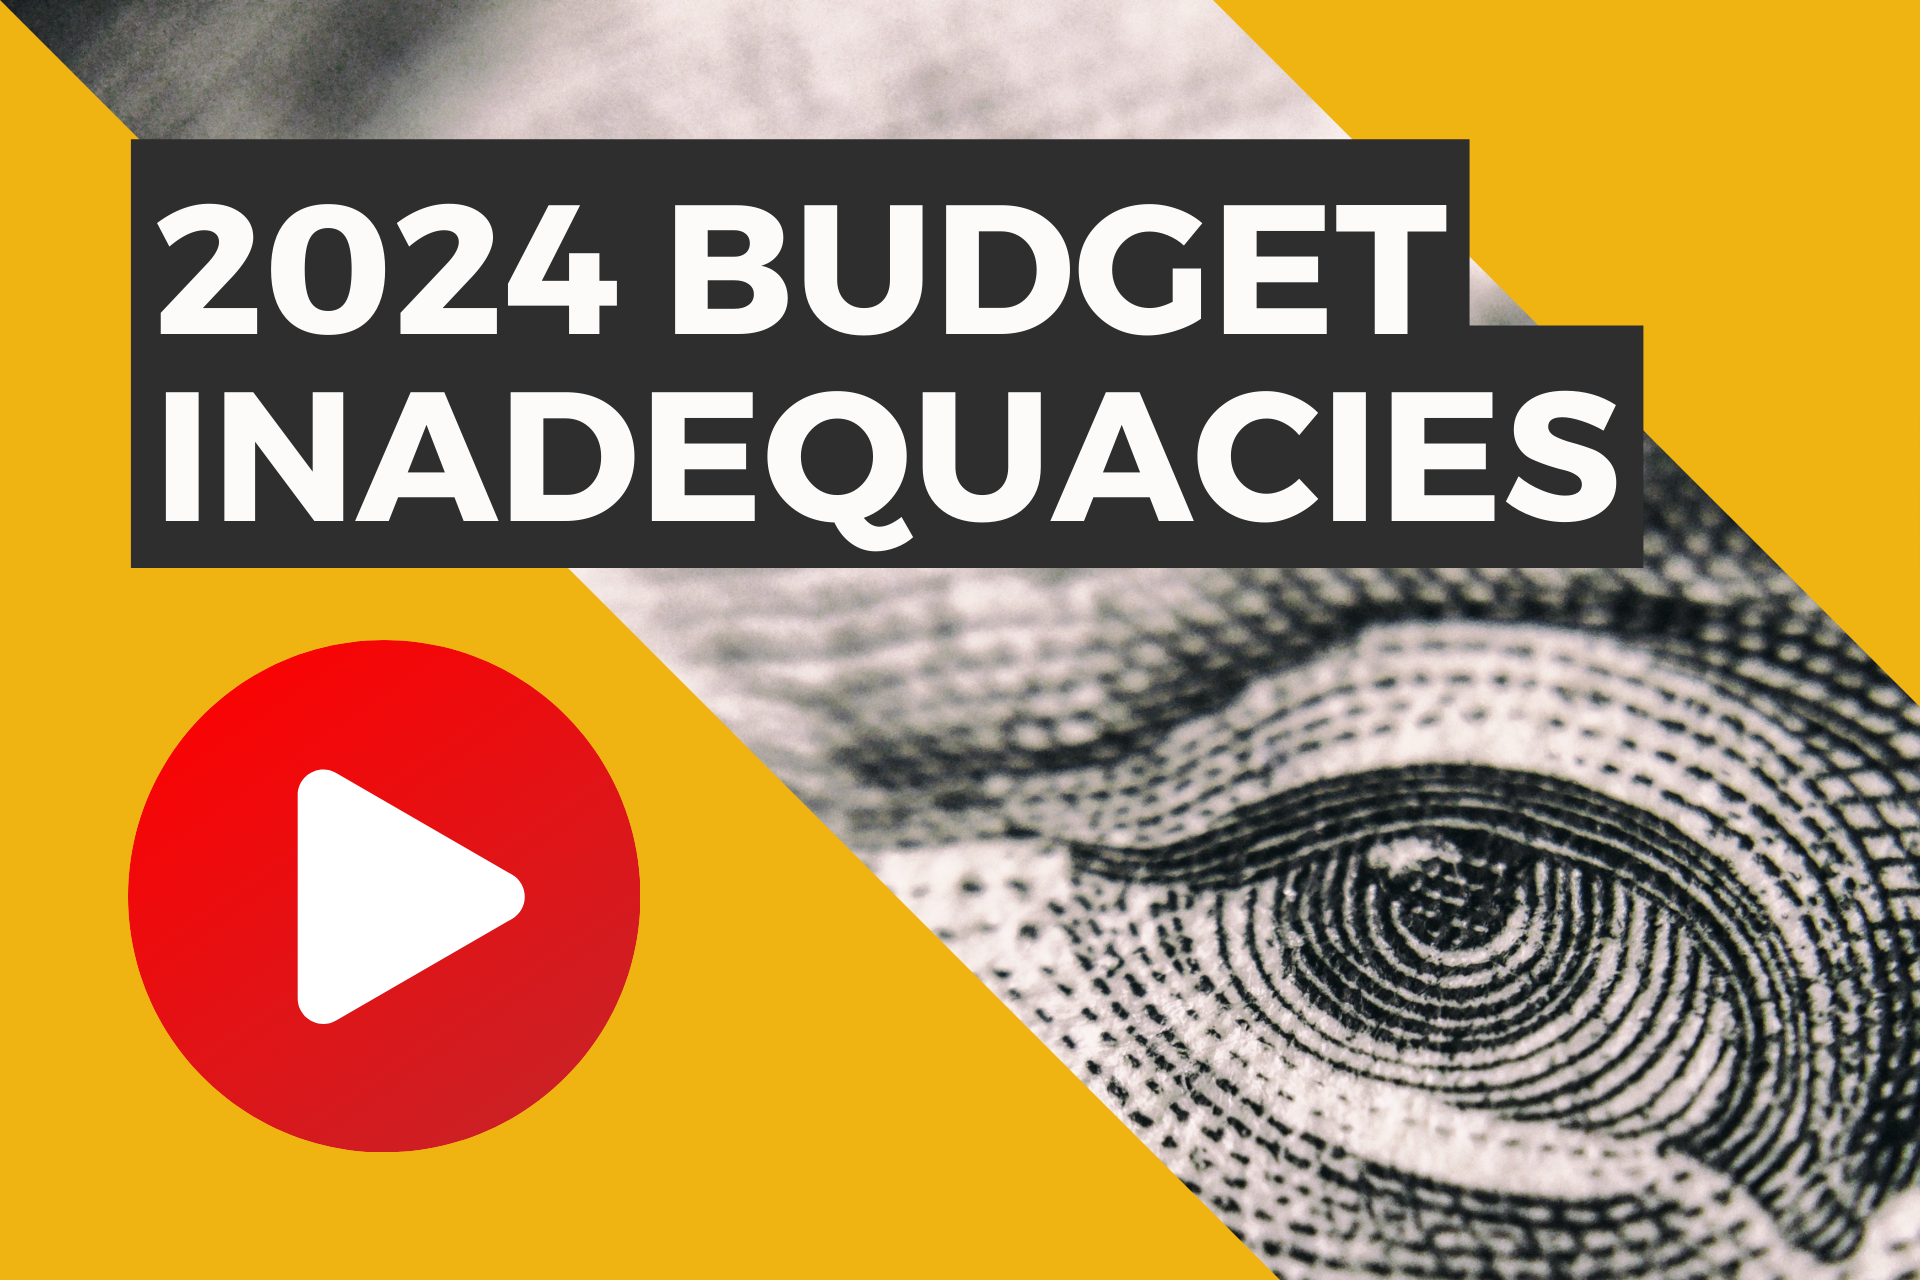 Graphical representation highlighting concerns about the 2024 budget inadequacies with a play button icon.